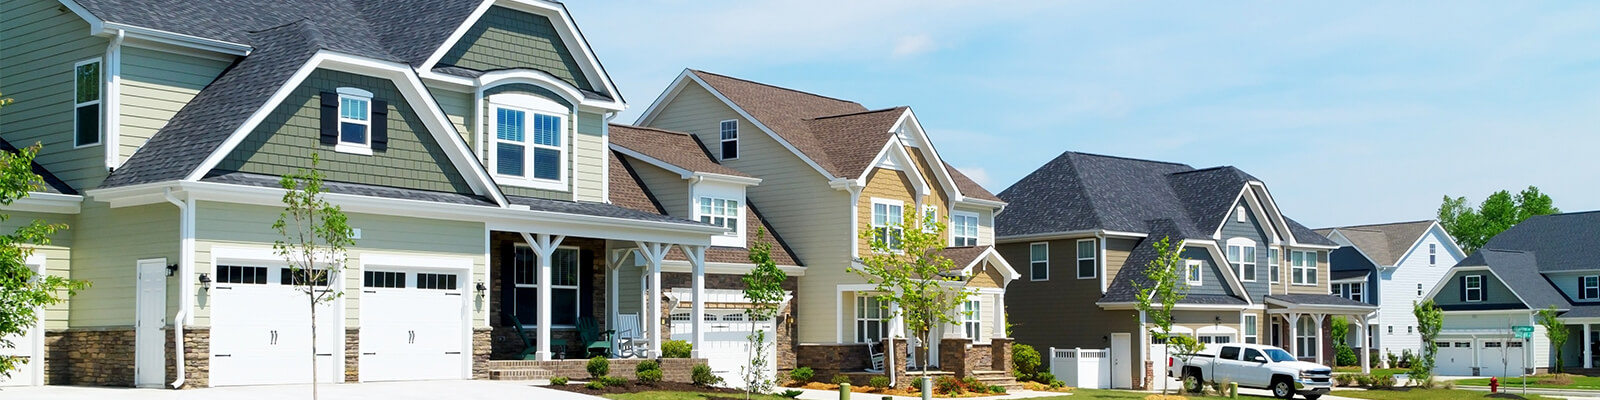 Homeowner Association and property managers